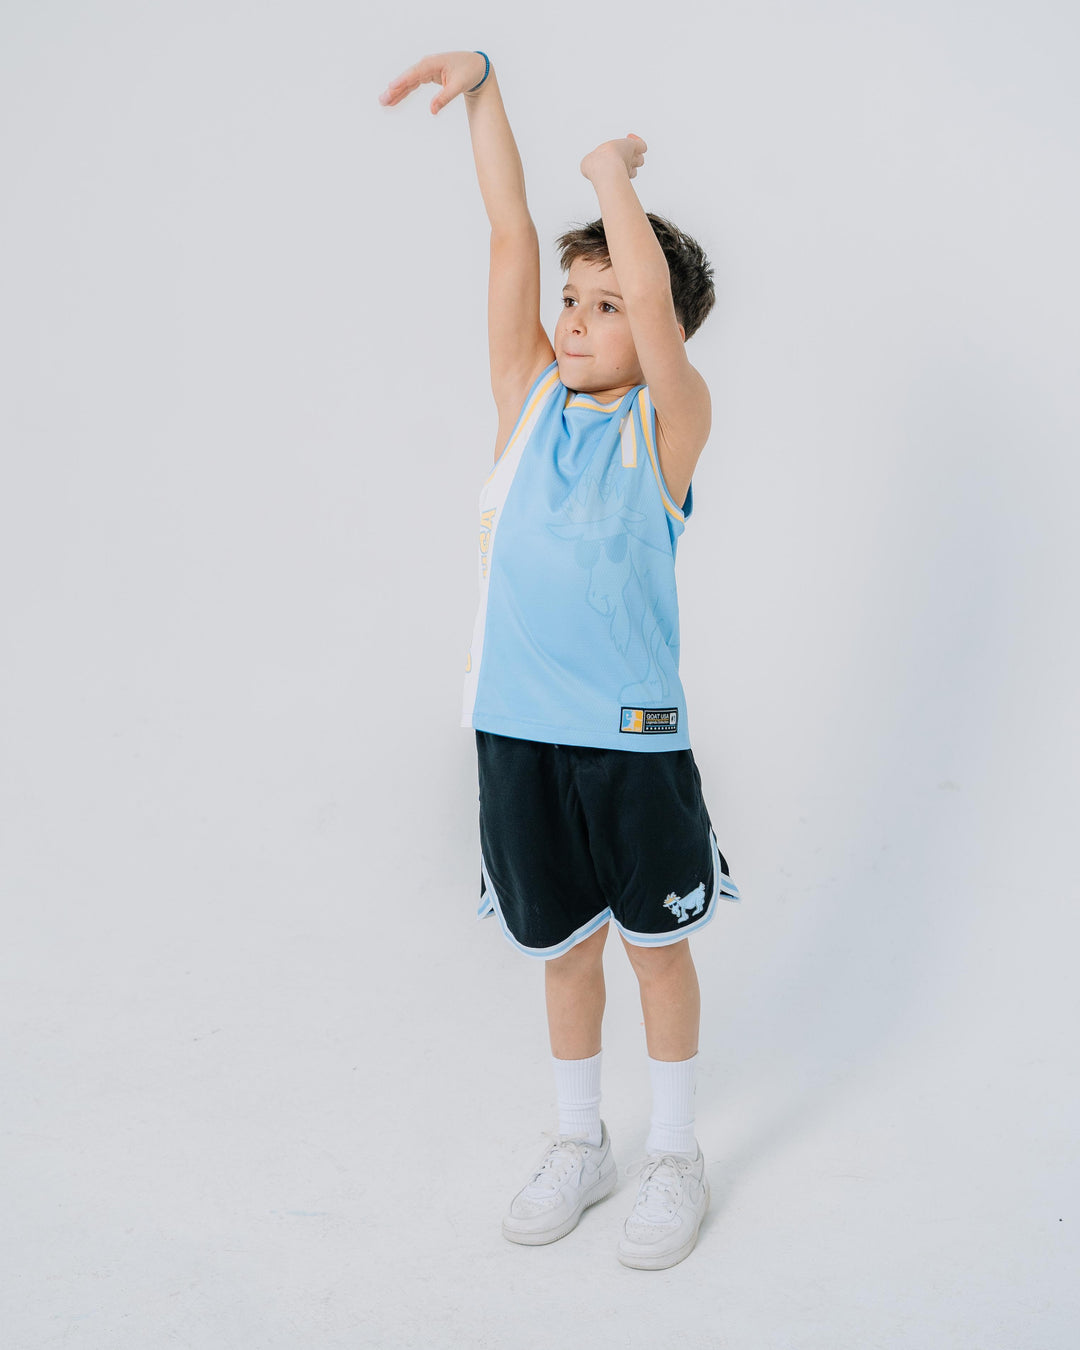 Kid holding a basketball shooting pose  wearing a carolina blue, white and gold jersey with goat design that wraps around